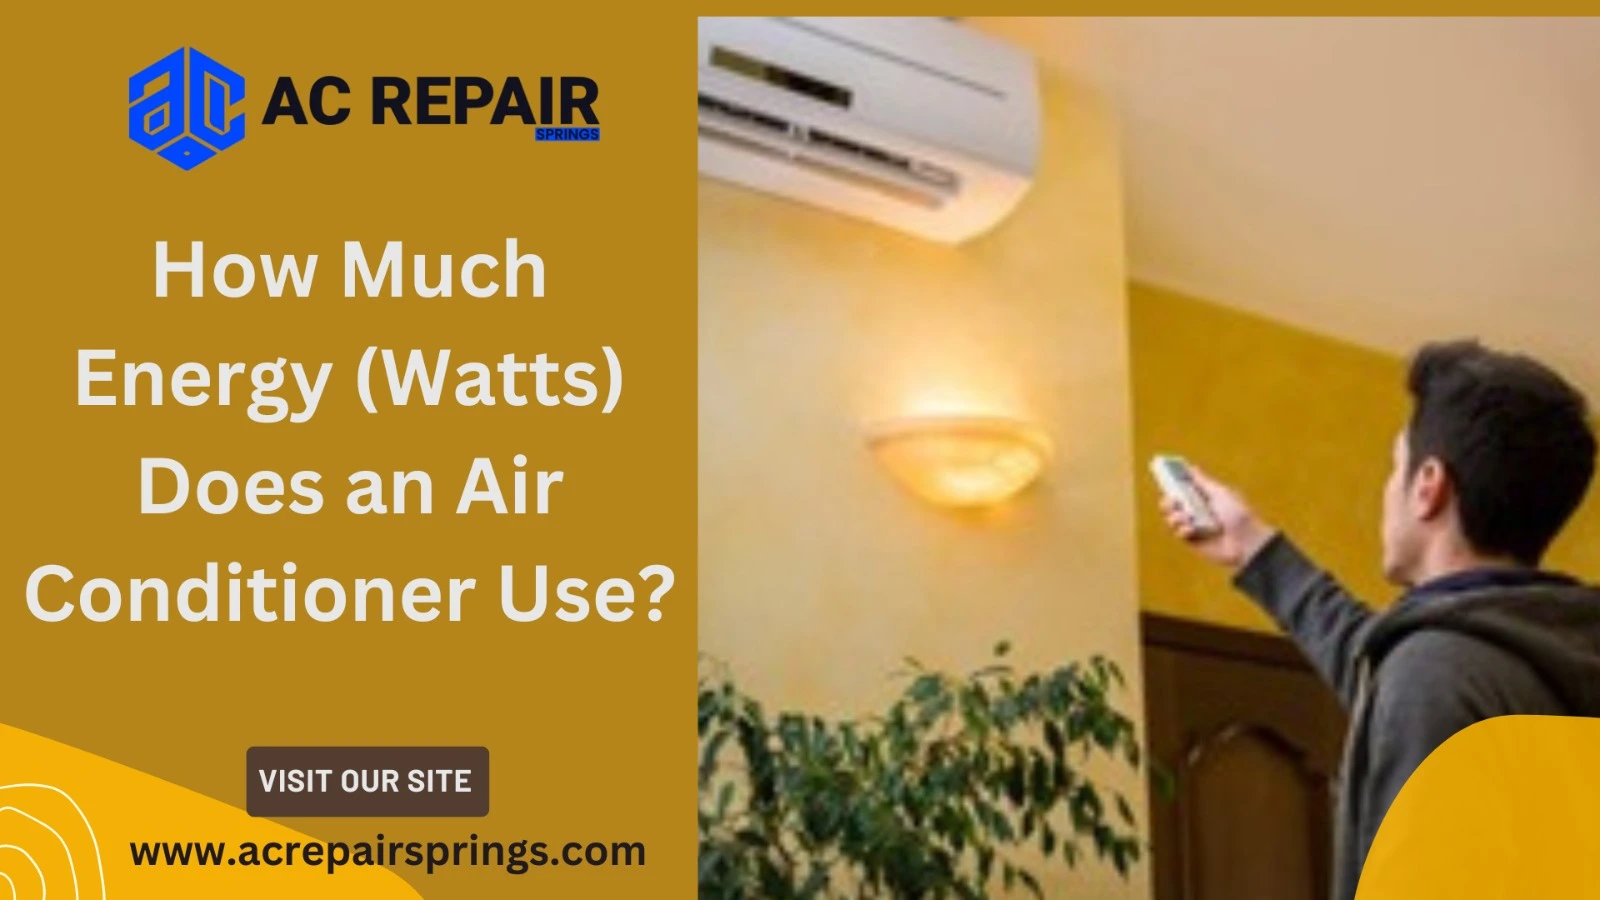 How Much Energy (Watts) Does an Air Conditioner Use?